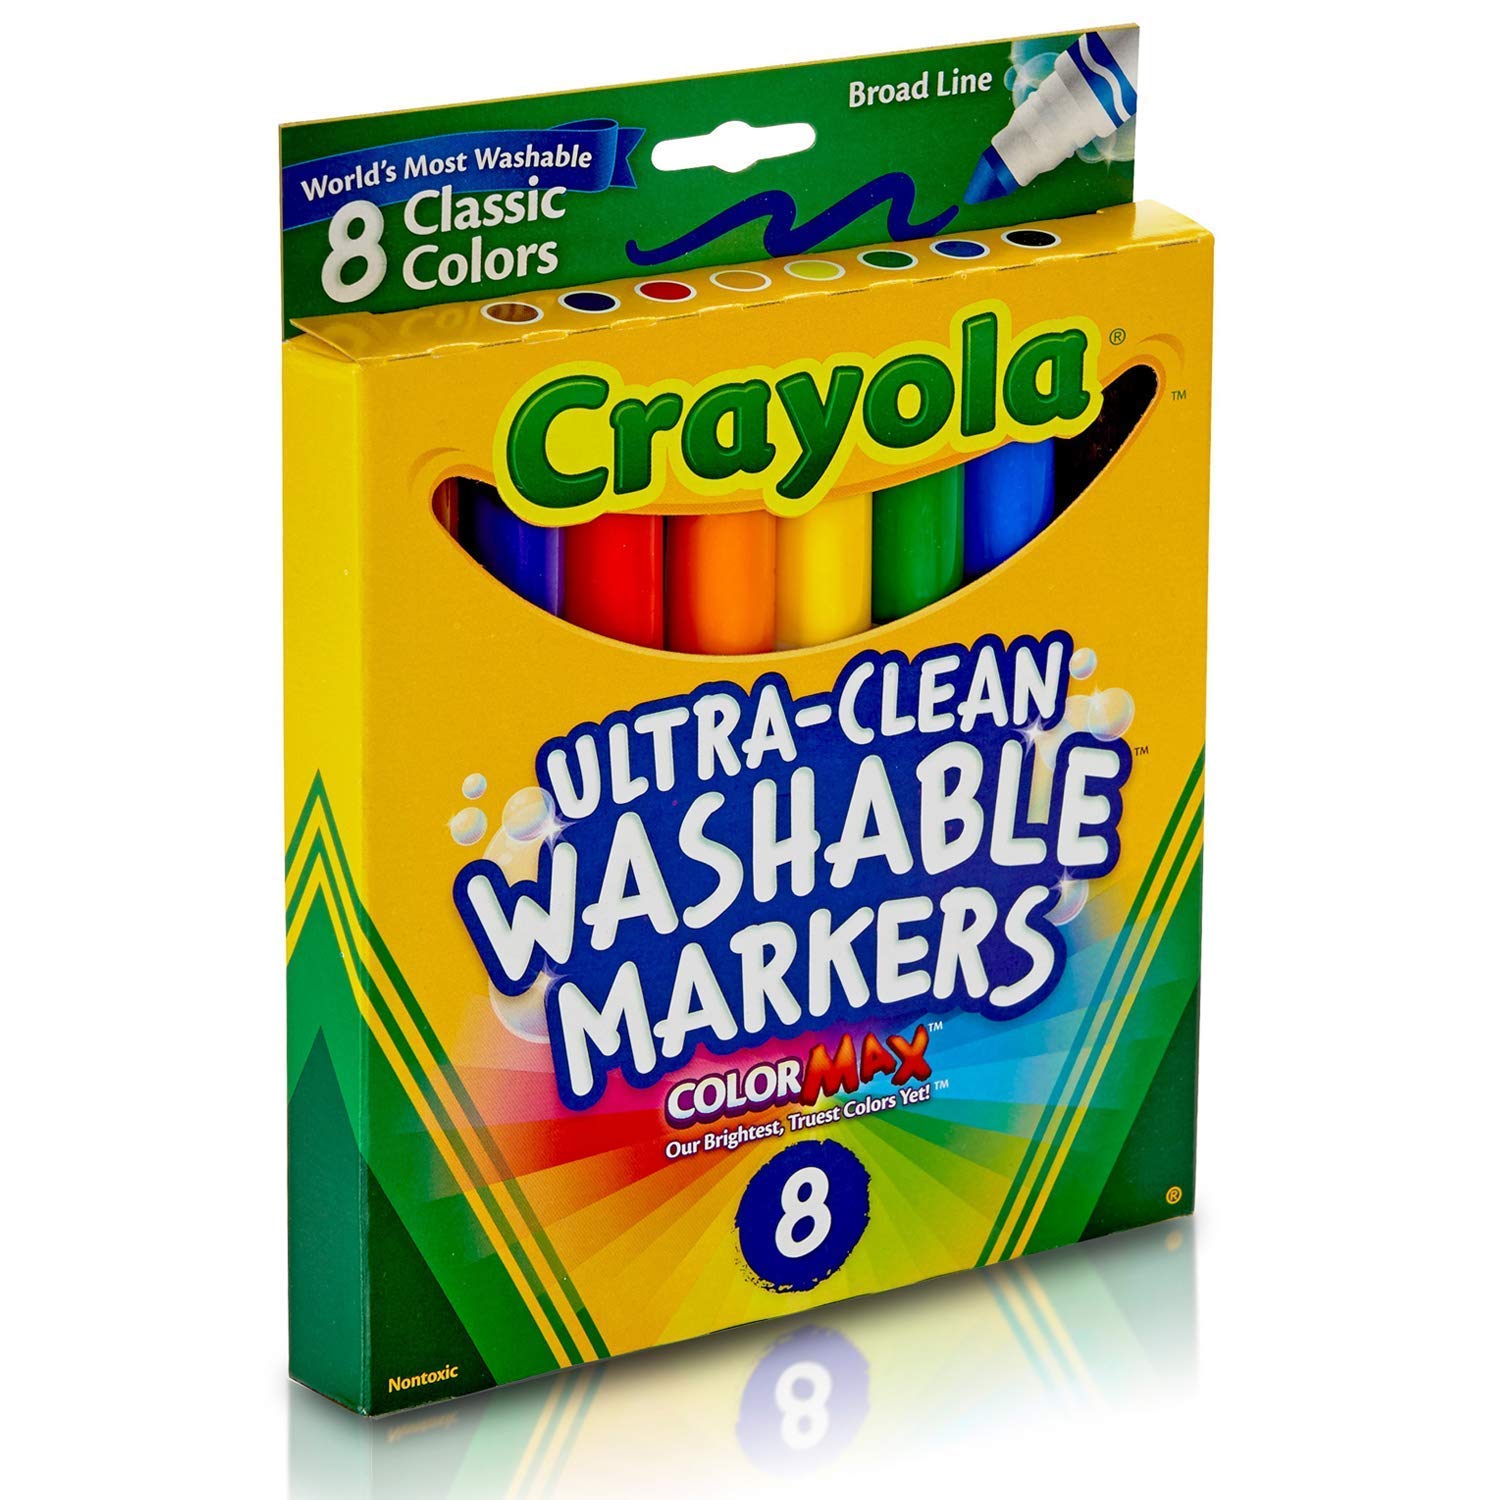 Crayola® Ultra-Clean Washable Color Markers, Broad Tip, Assorted Classic Colors, Box Of 8